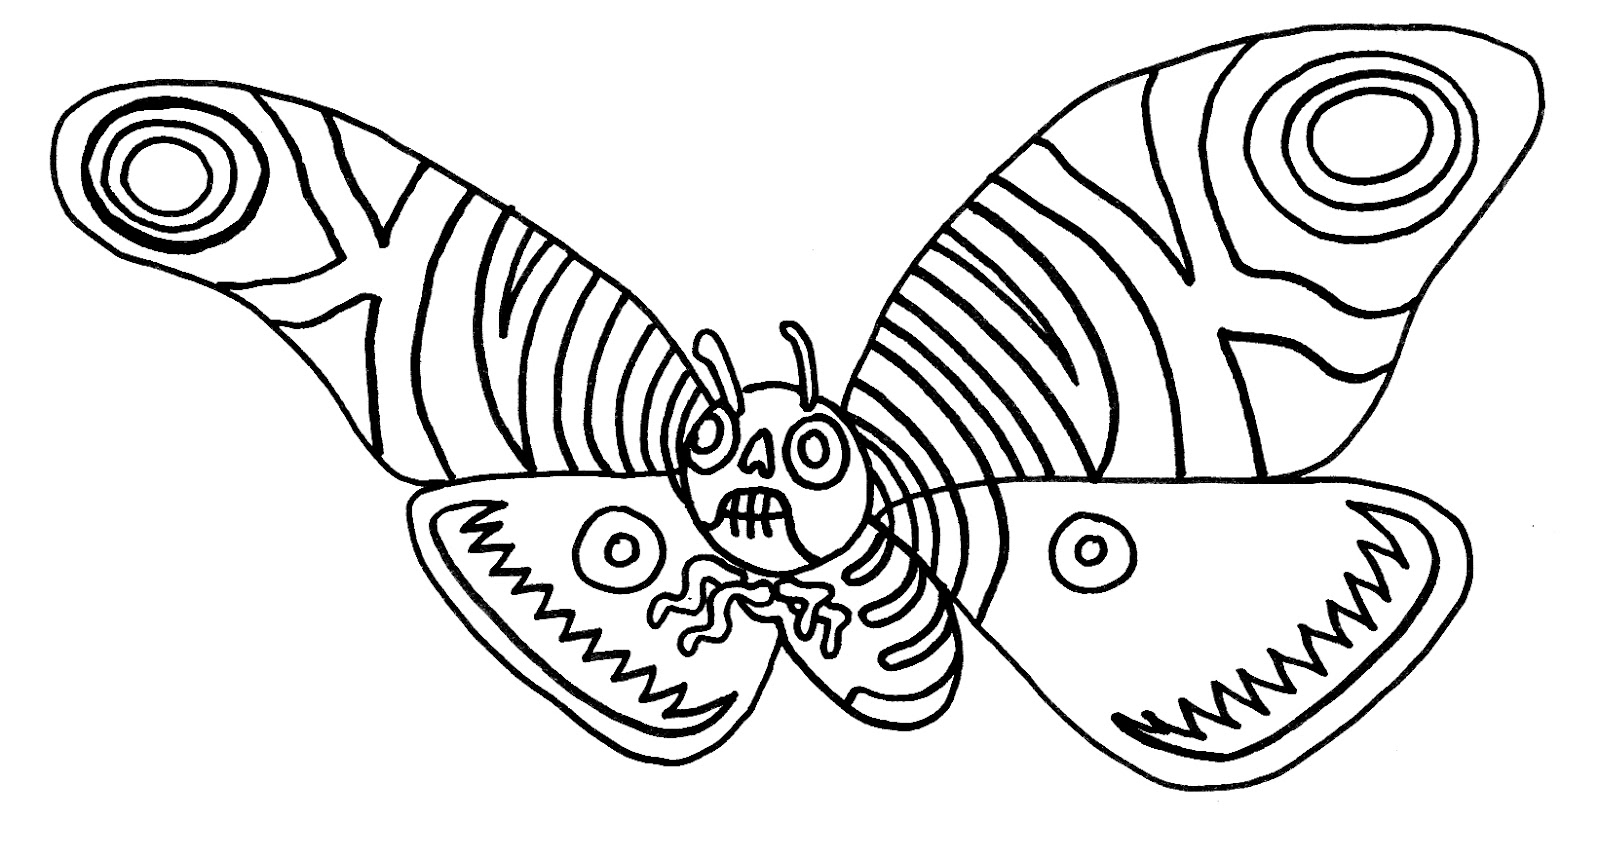 Yucca Flats, N.M.: Wenchkin's Coloring Pages - Mothra